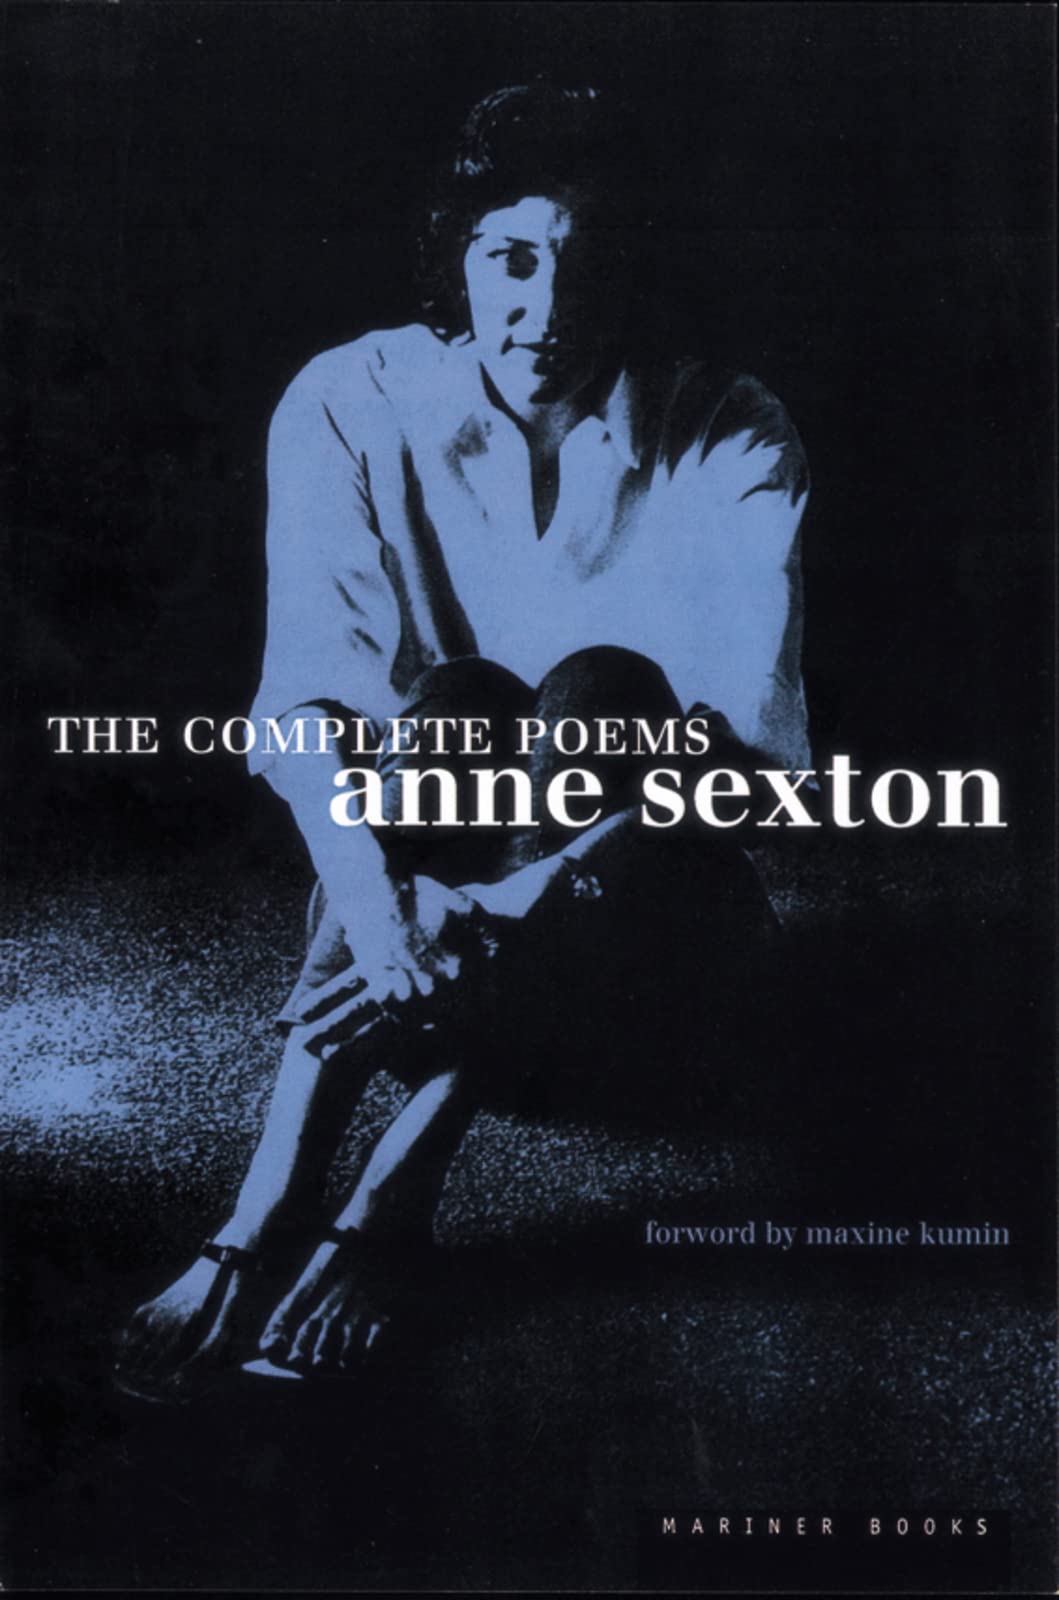 The Complete Poems of Anne Sexton